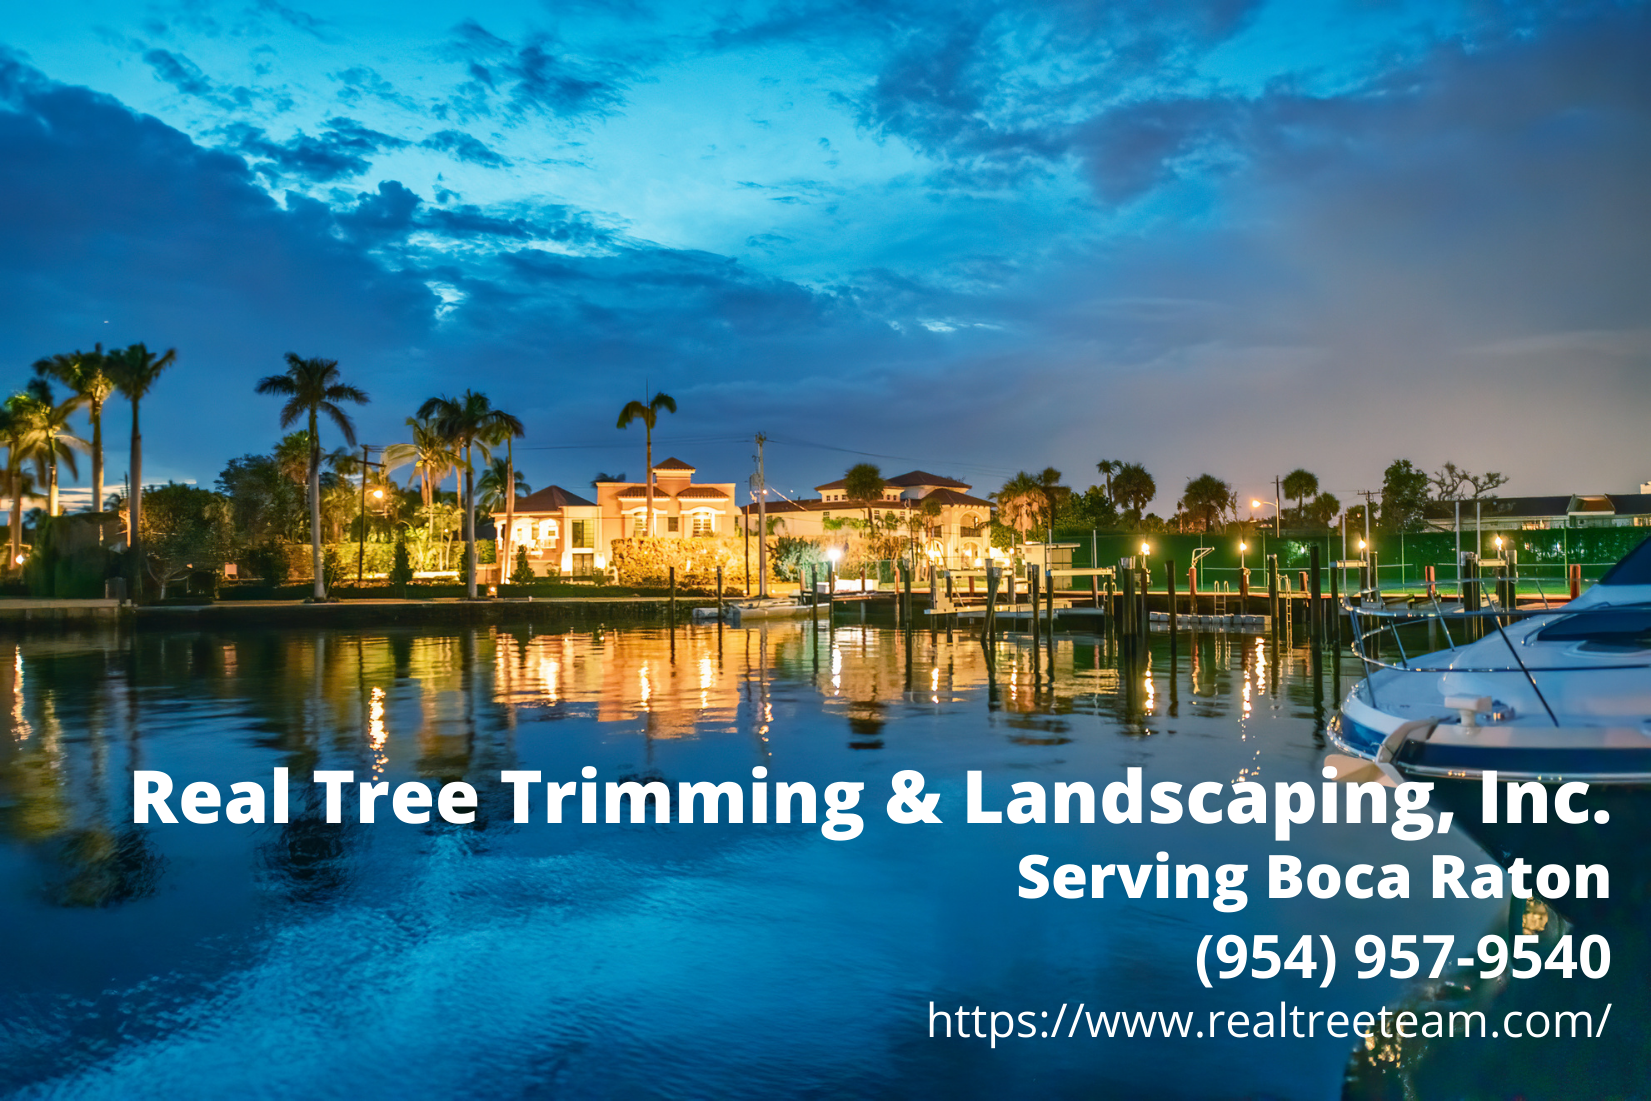 Boca Raton FL at night. Text by Real Tree Trimming & Landscaping, Inc.